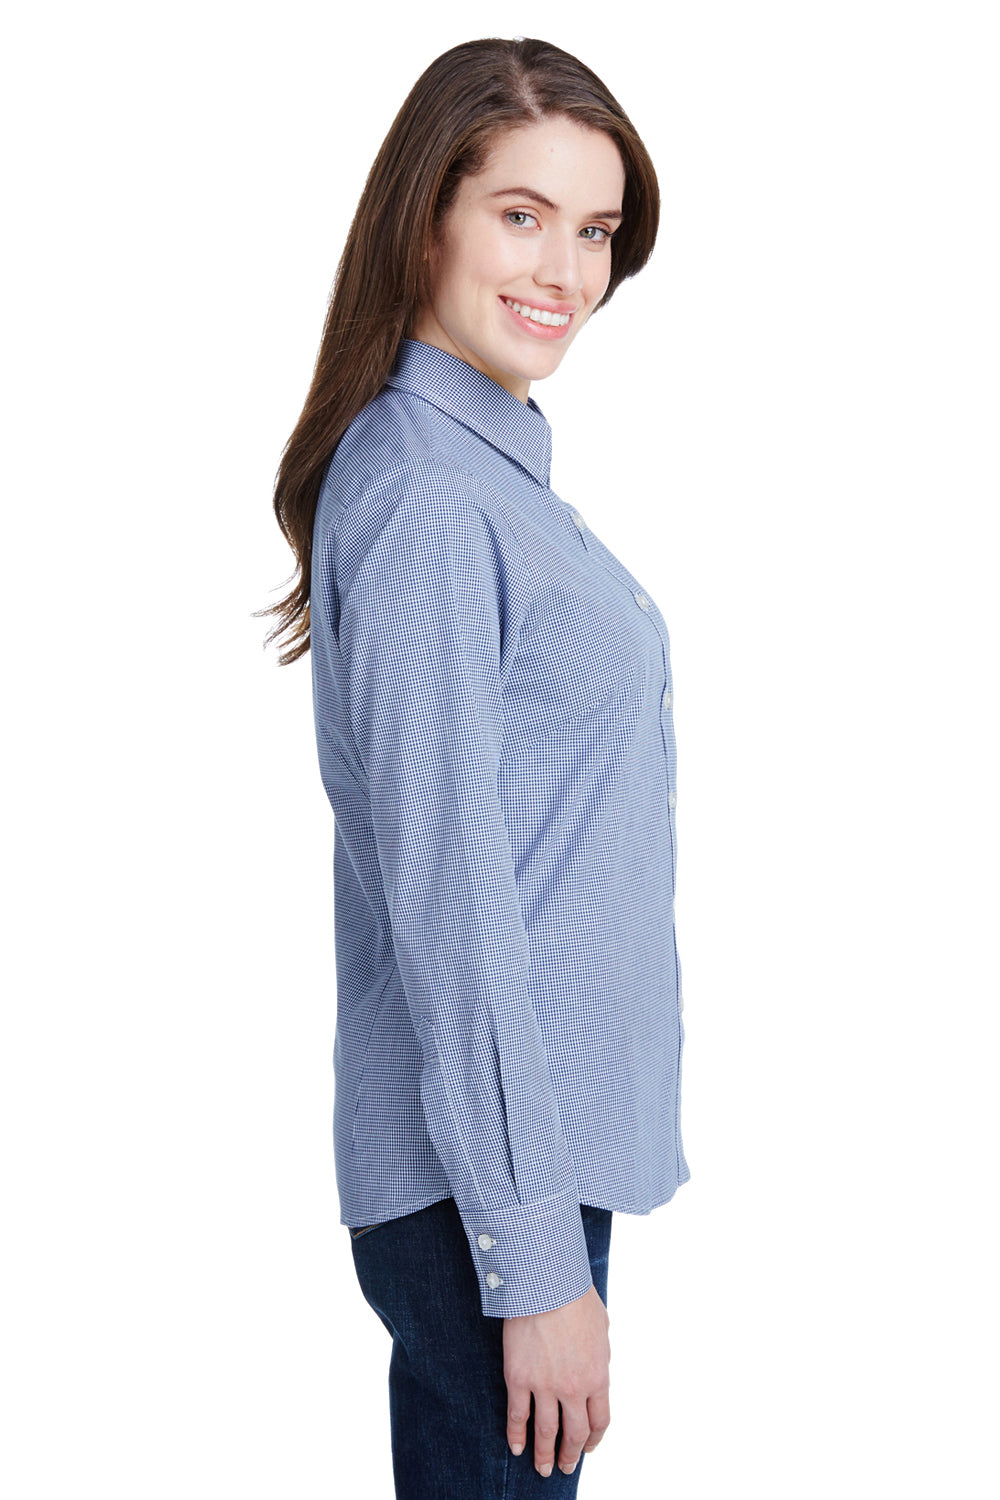 Artisan Collection RP320 Womens Microcheck Gingham Long Sleeve Button Down Shirt Navy Blue/White Model Side